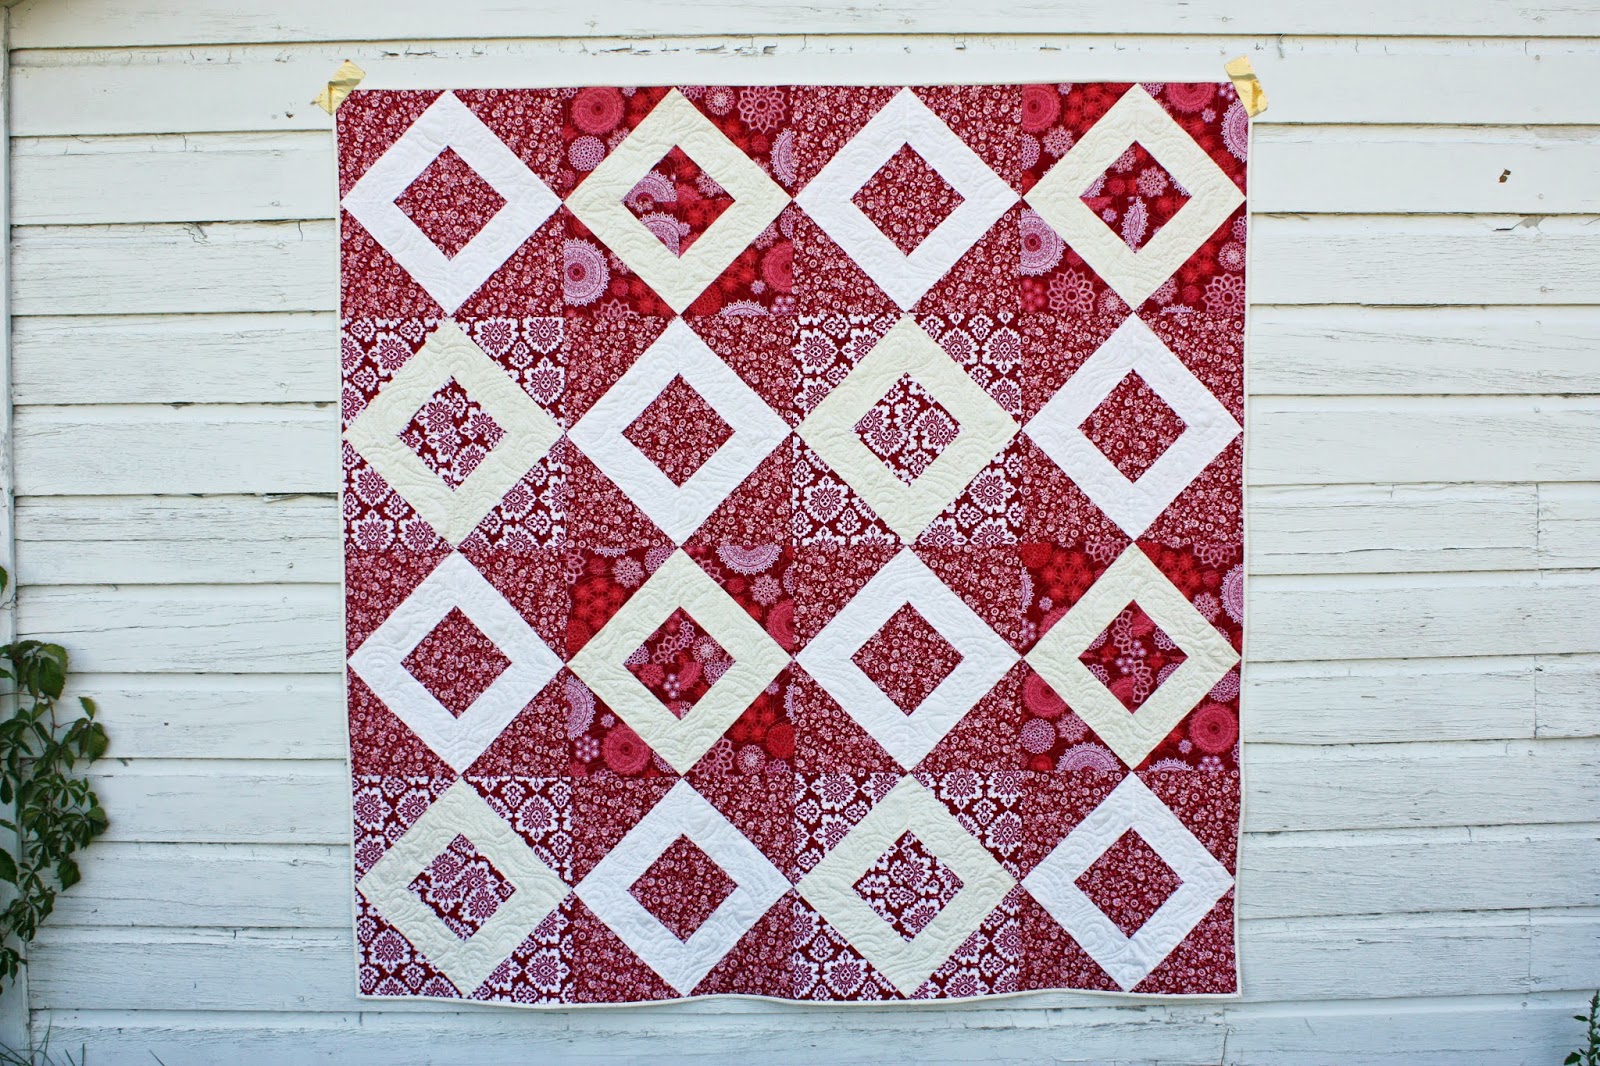 Cross My Heart.Loving Hands In All Seasons Quilt Guild Raffle Quilt.  Quilted by Jackie